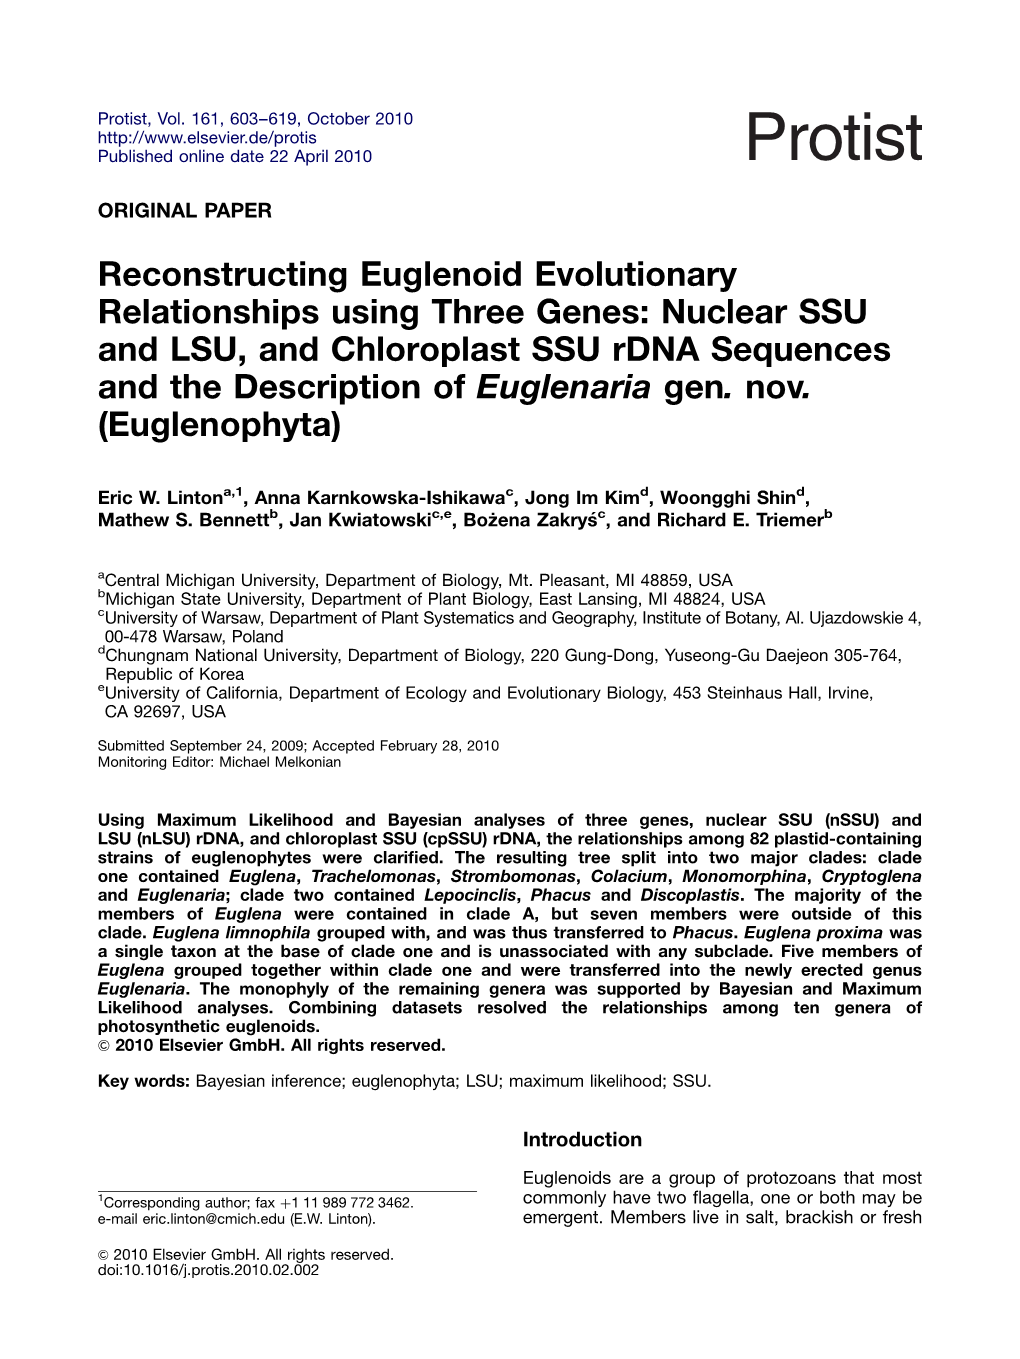 Reconstructing Euglenoid Evolutionary Relationships Using Three Genes: Nuclear SSU and LSU, and Chloroplast SSU Rdna Sequences and the Description of Euglenaria Gen